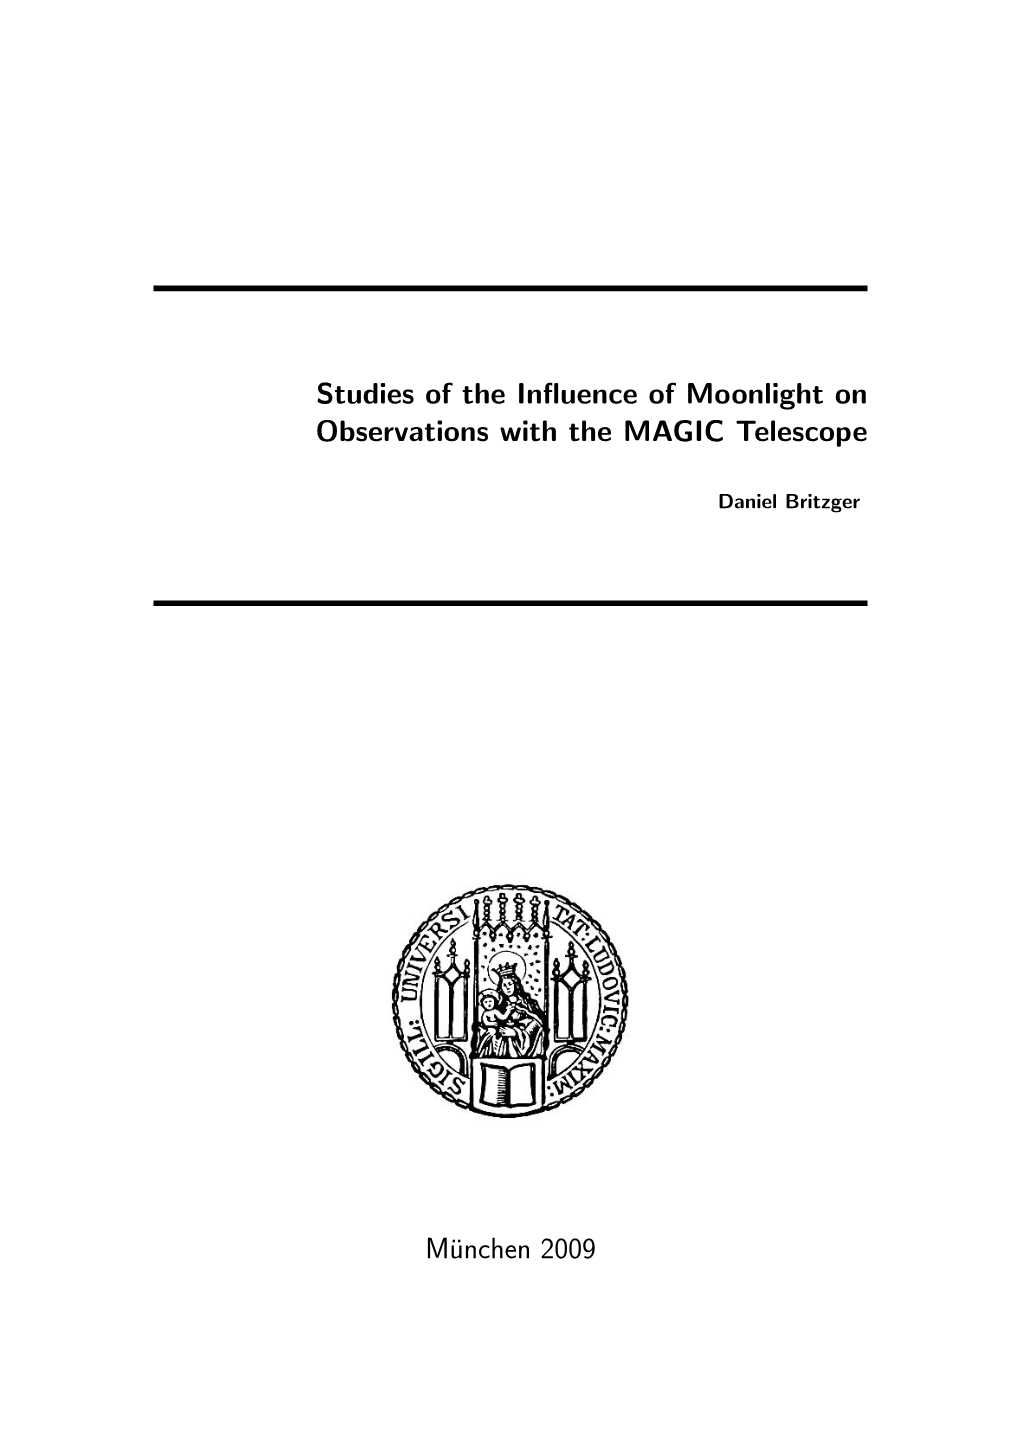 Studies of the Influence of Moonlight on Observations with the MAGIC